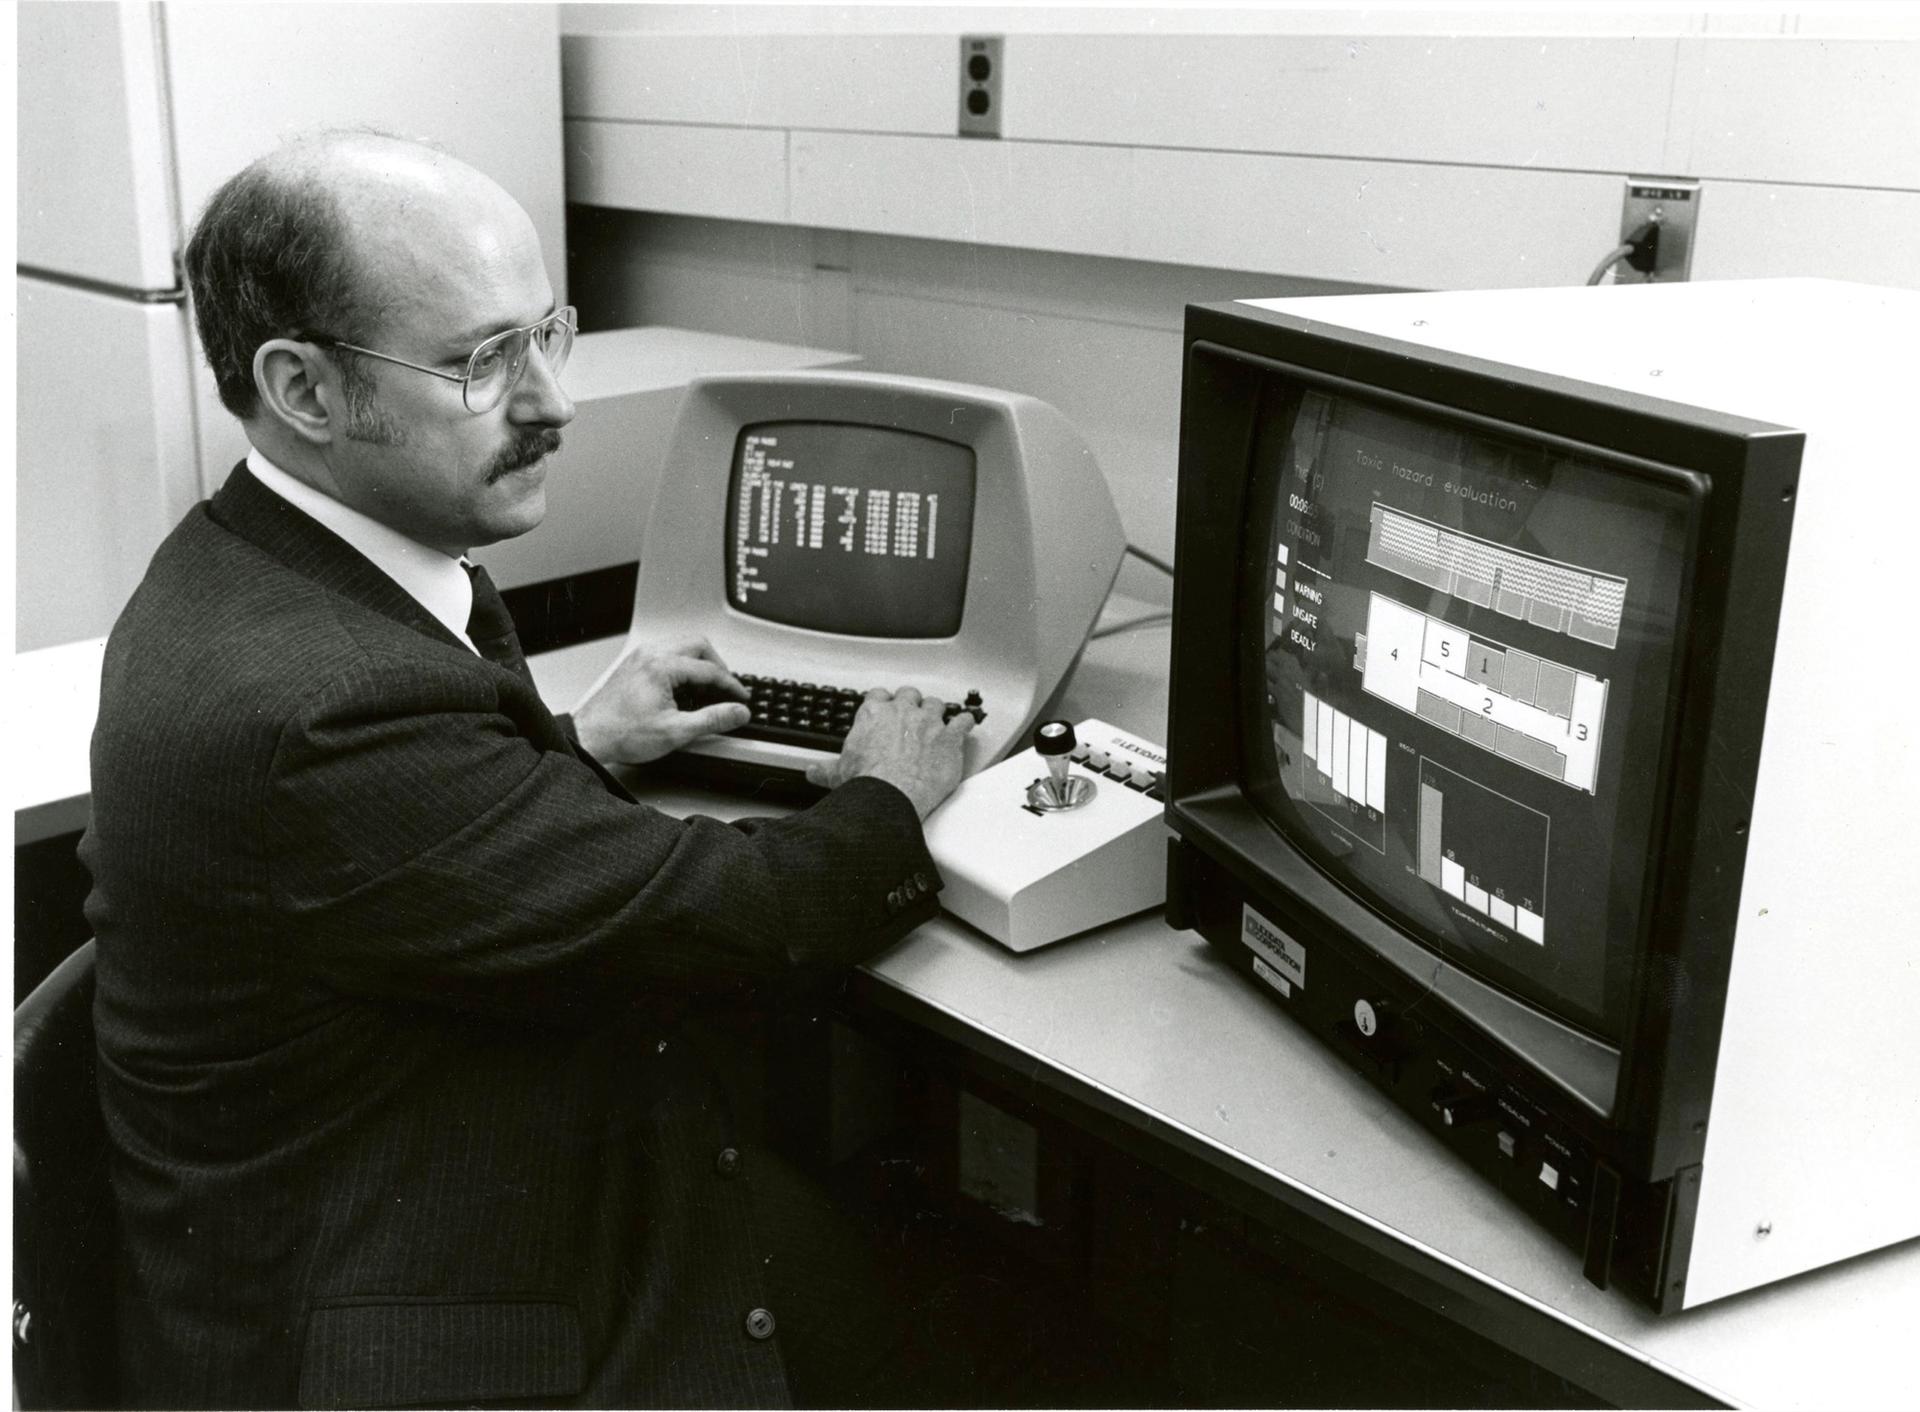 Walter Jones programming in 1989. Image courtesy of the National Institute of Standards and Technology Digital Collections.